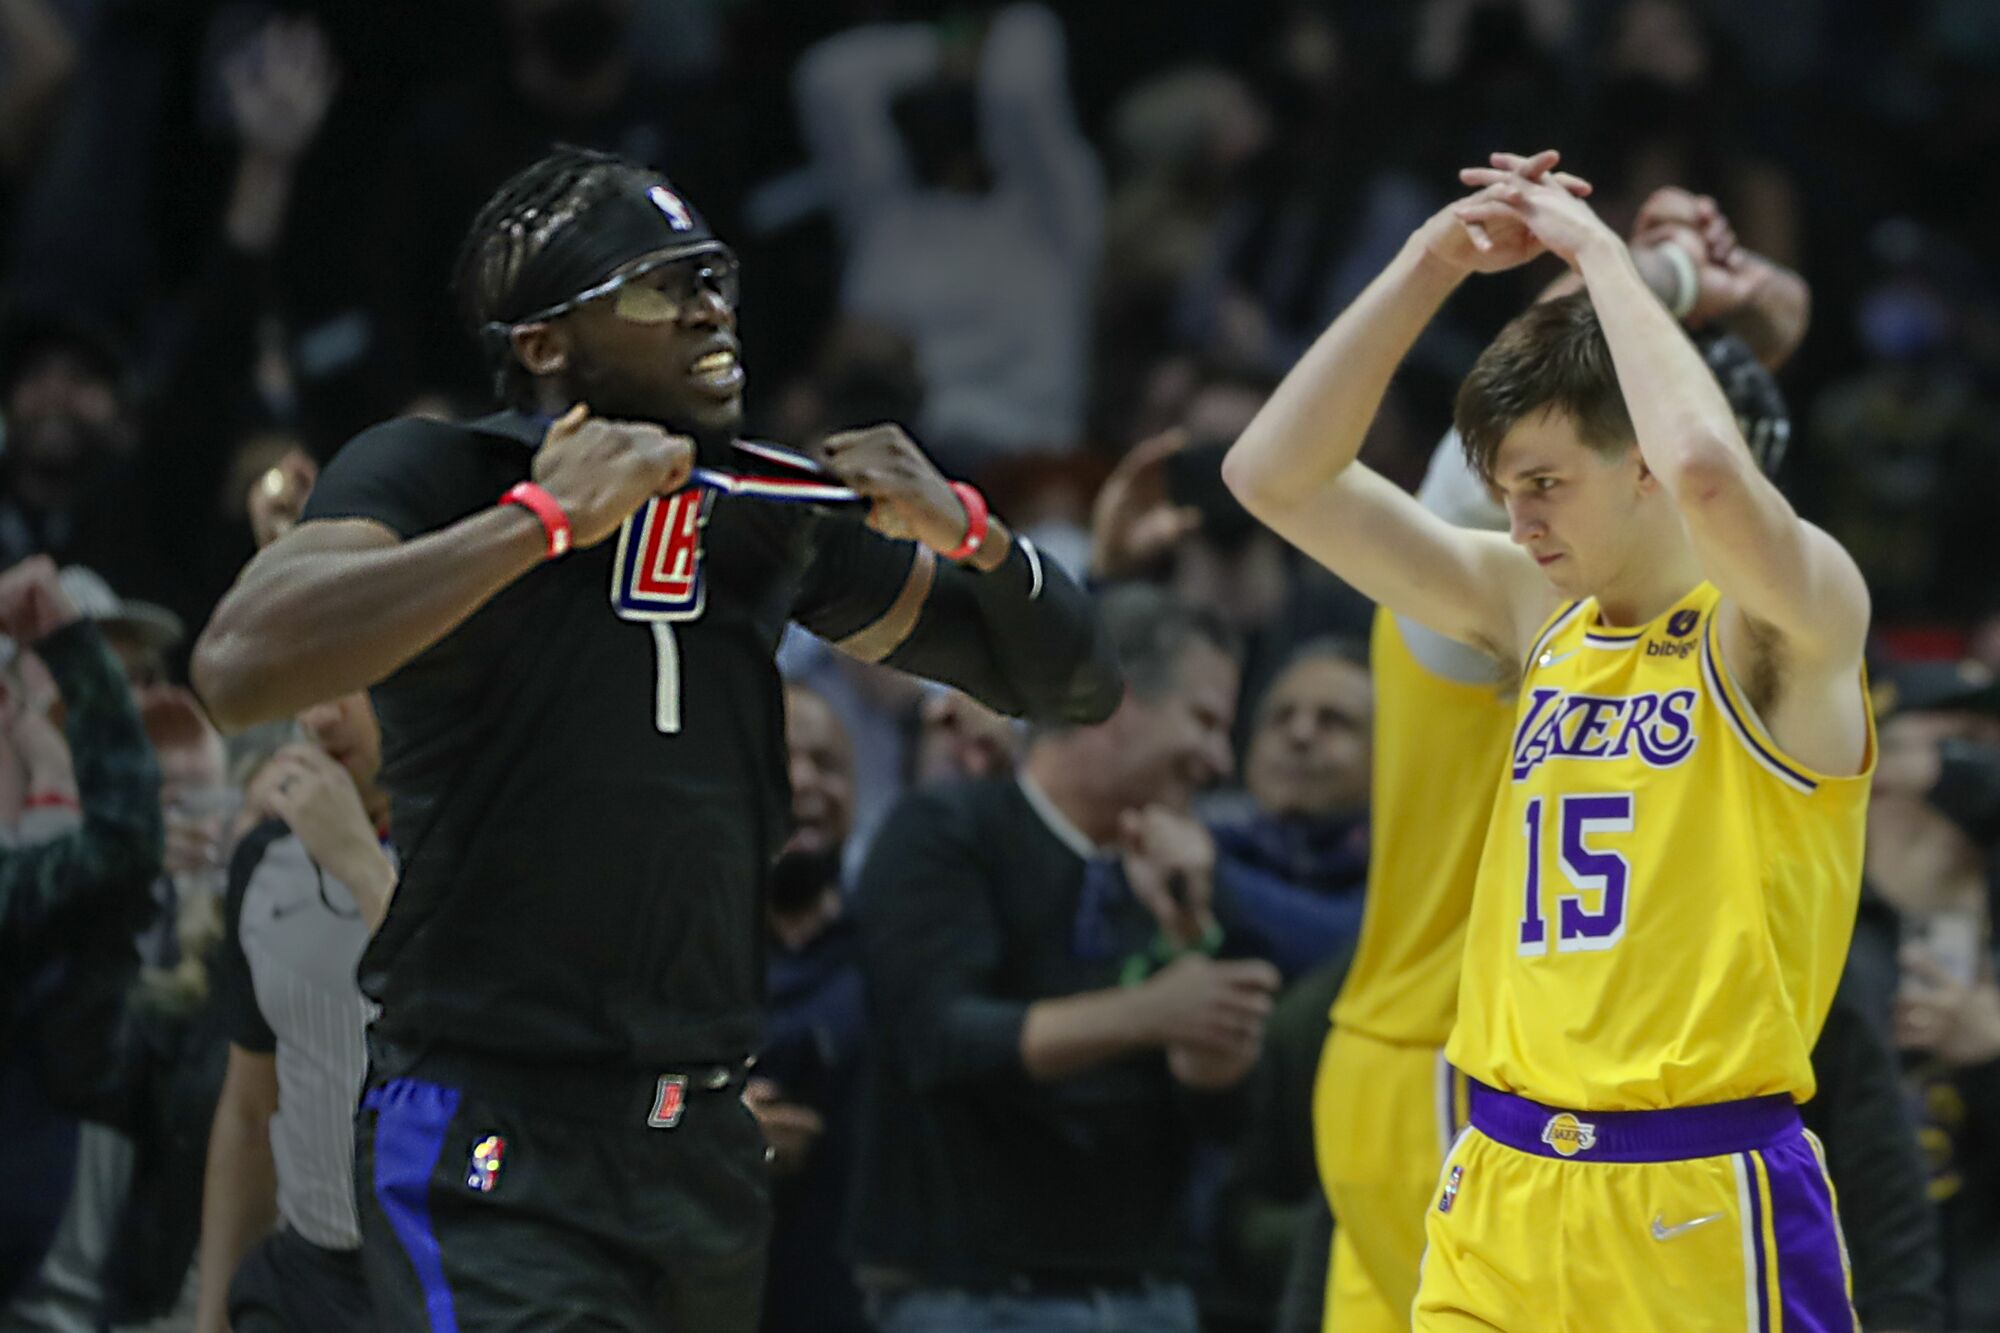 Clippers' Reggie Jackson celebrates winning basket by tugging on jersey while Lakers' Austin Reaves throws his arms overhead.